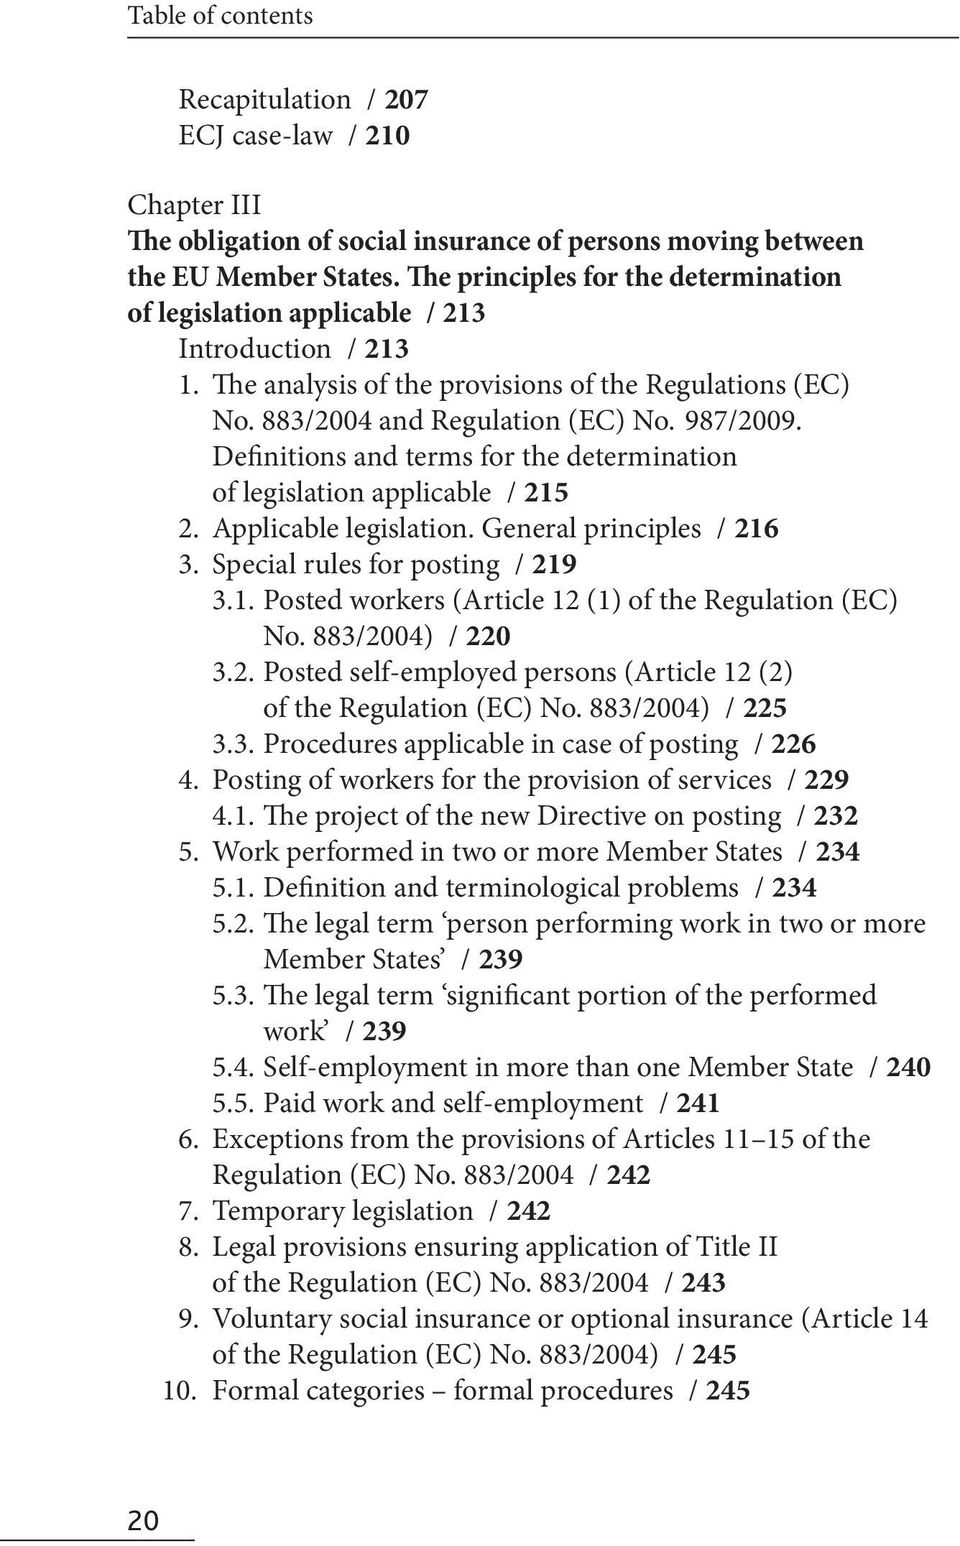 Definitions and terms for the determination of legislation applicable / 215 2. Applicable legislation. General principles / 216 3. Special rules for posting / 219 3.1. Posted workers (Article 12 (1) of the Regulation (EC) No.